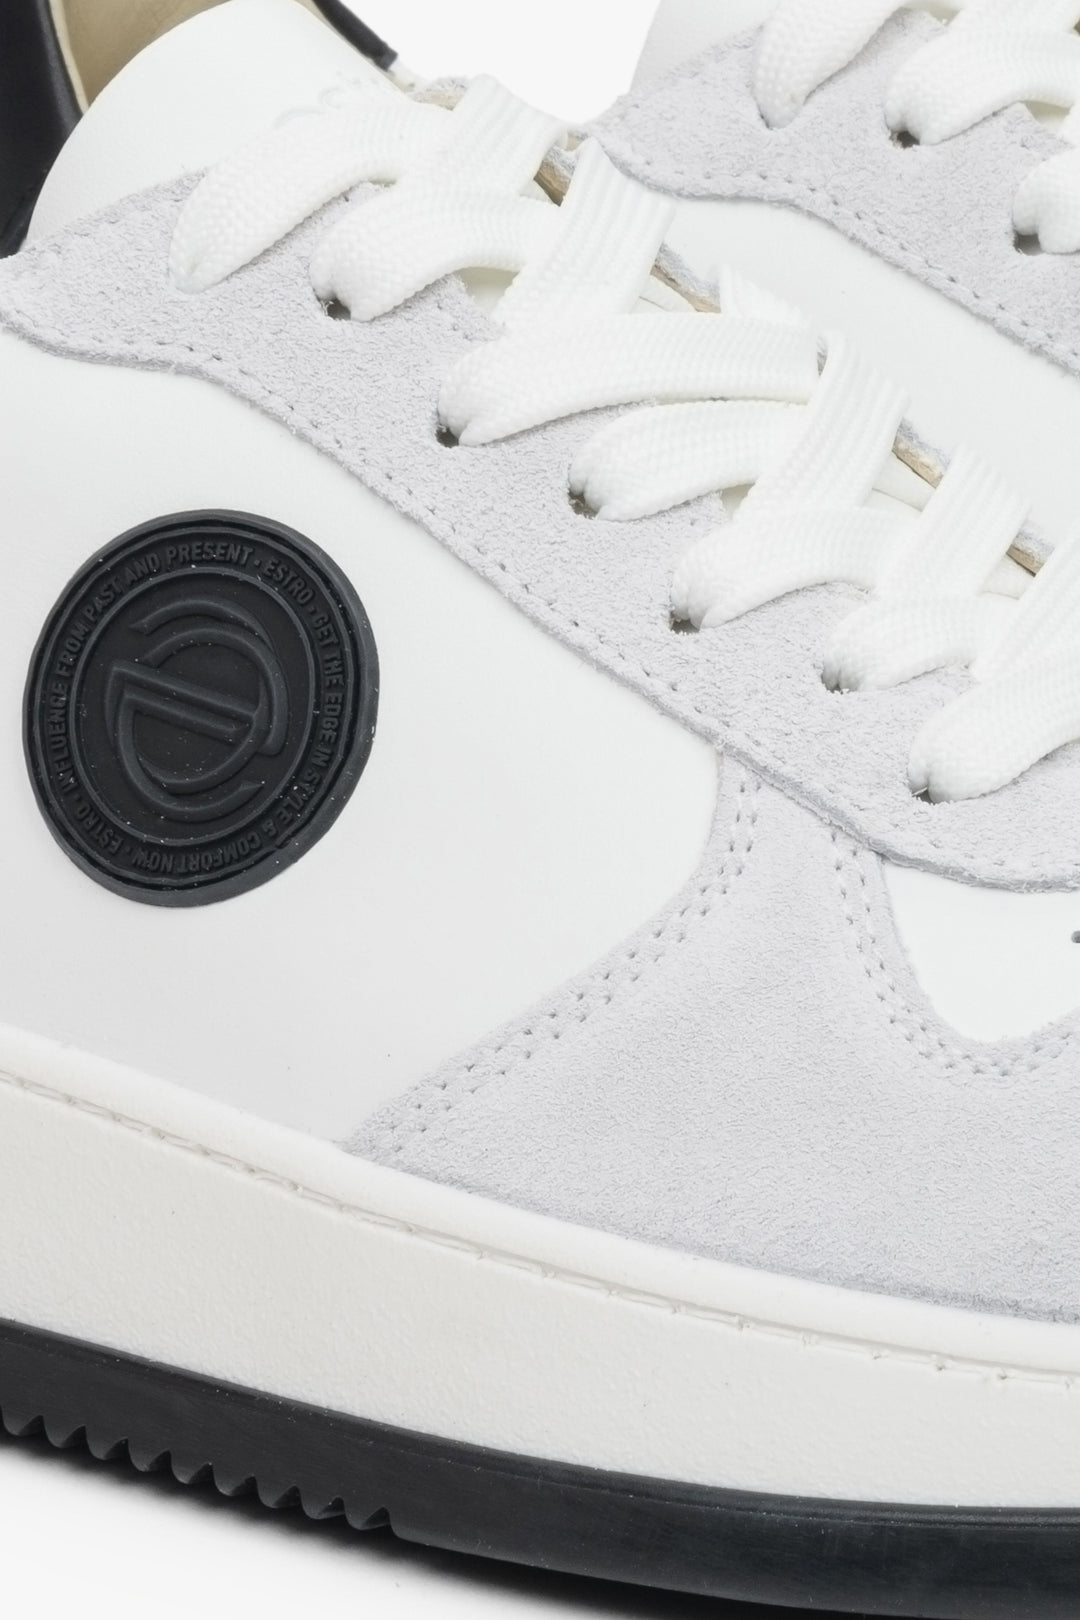 Men's sneakers in suede and leather, grey and white - close-up of details.